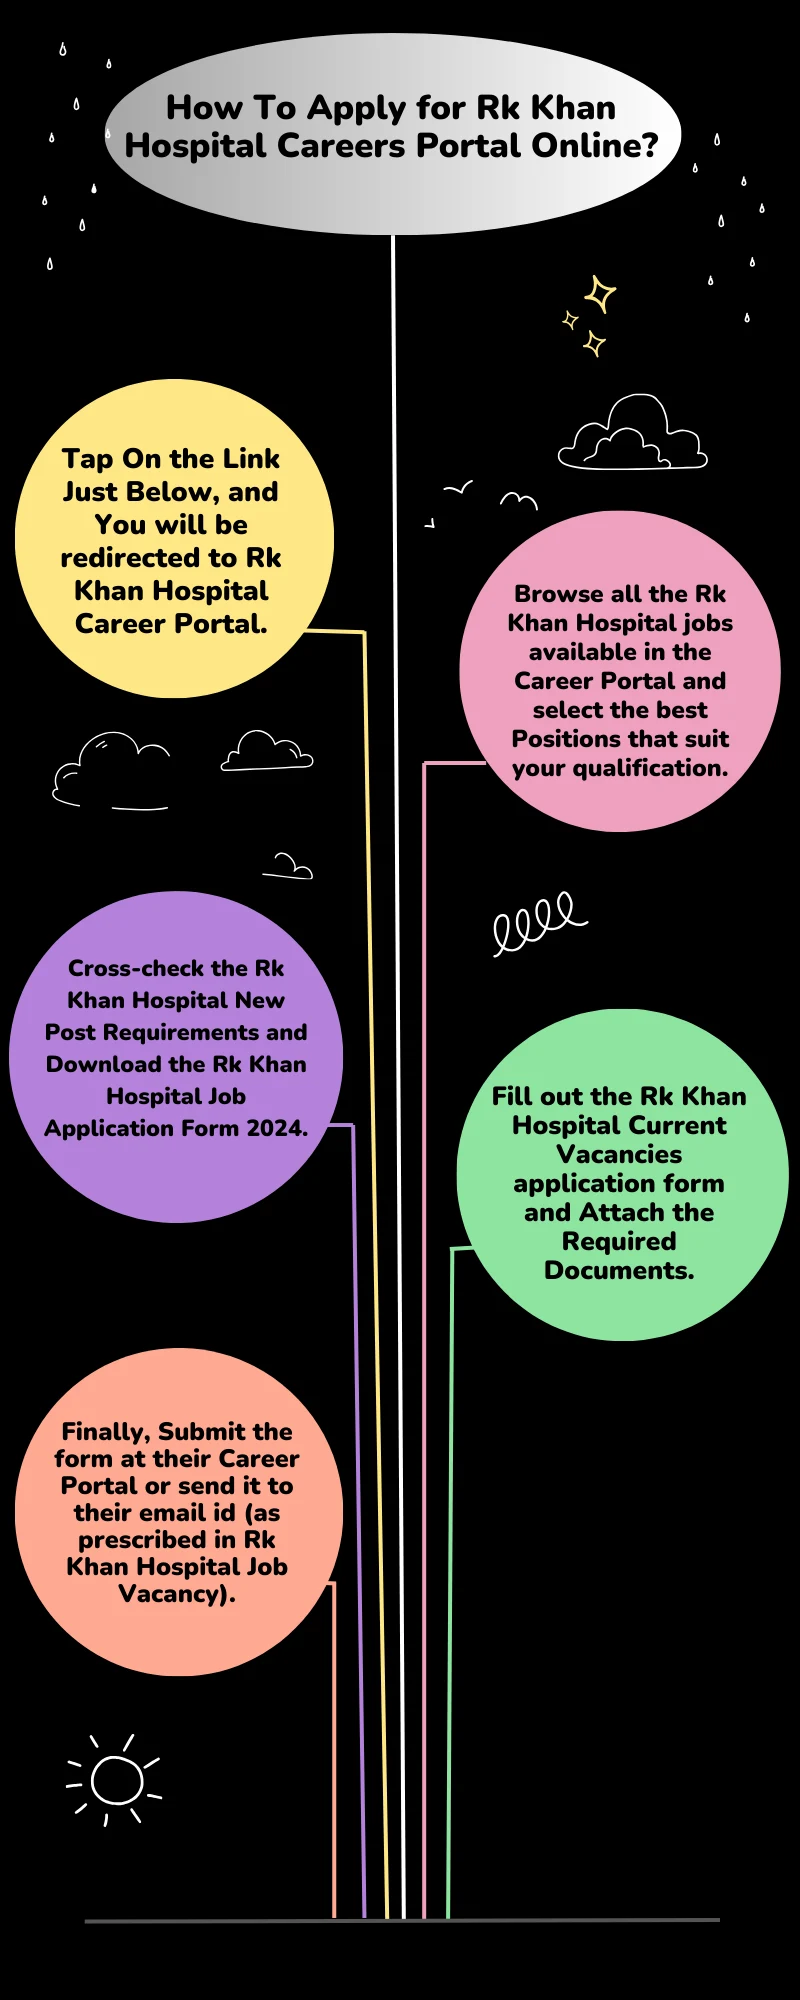 How To Apply for Rk Khan Hospital Careers Portal Online?